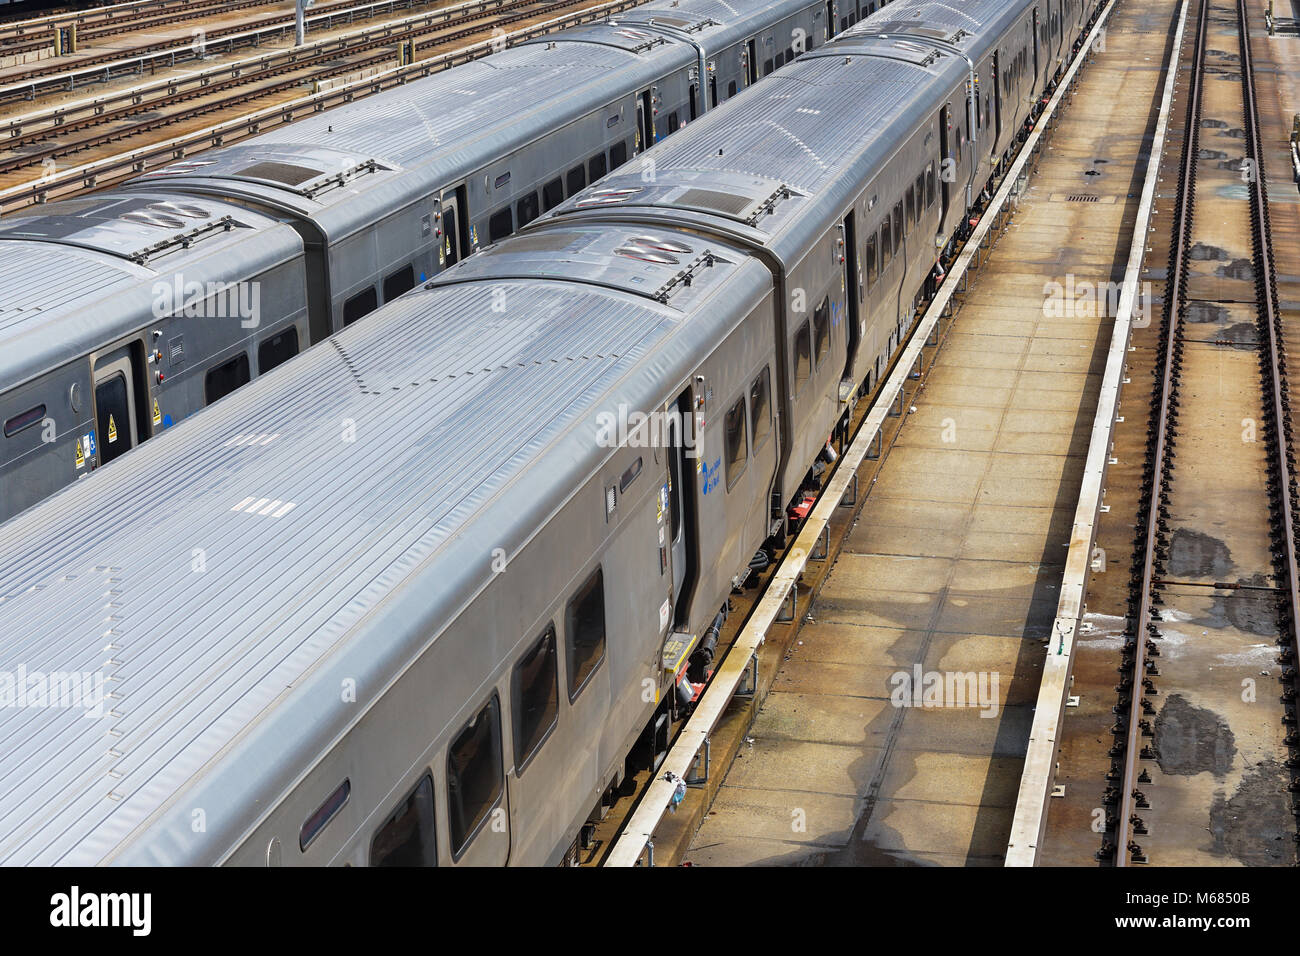 New York City subway trains at the MTA depot, seen from the High Line in Manhattan. Stock Photo